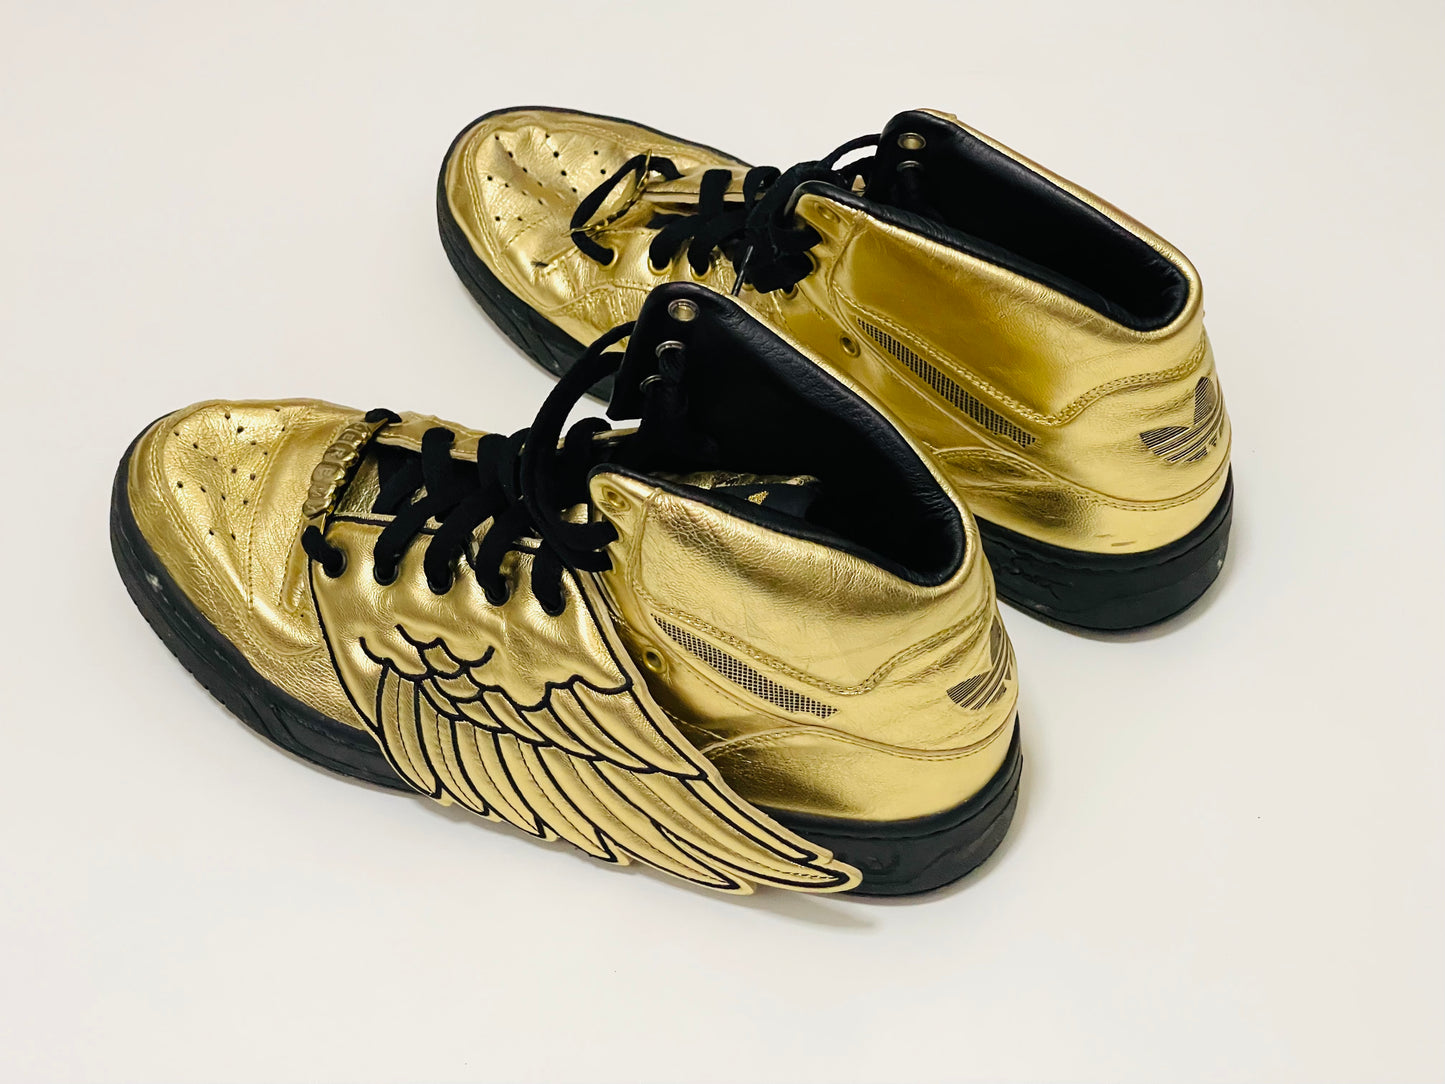 Collectible Gold Leather Adidas Jeremy Scott Wings Sneakers Shoes ( Size : US 9.5 Japan 27.5 cm  )